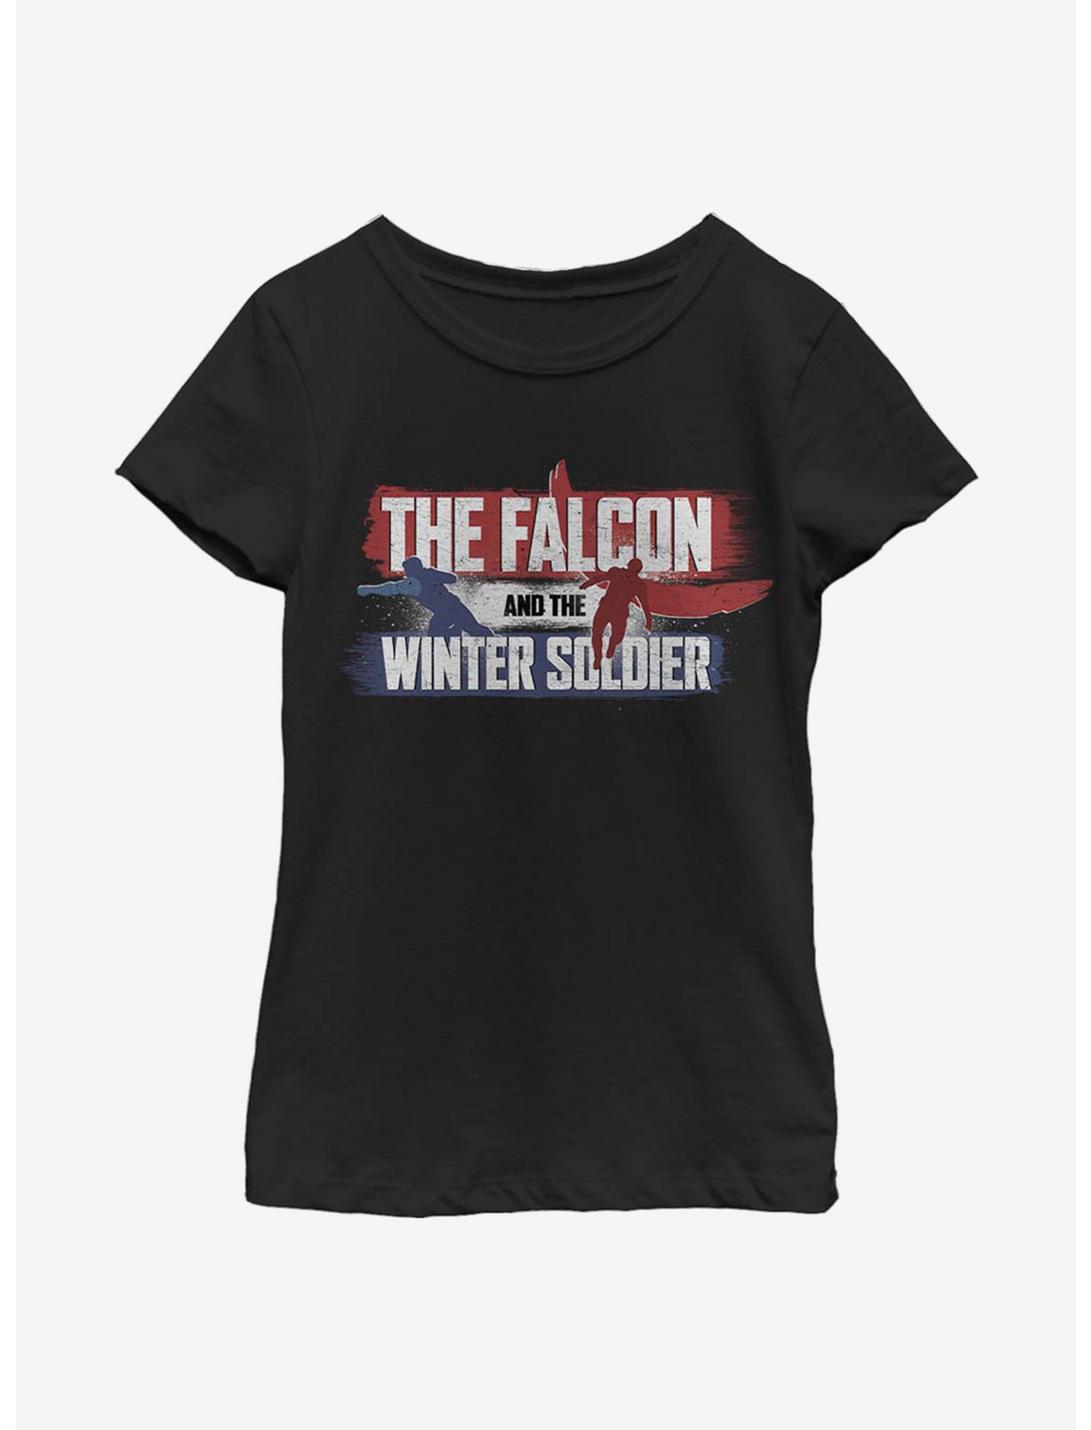 Marvel The Falcon And The Winter Soldier Spray Paint Youth Girls T-Shirt, BLACK, hi-res